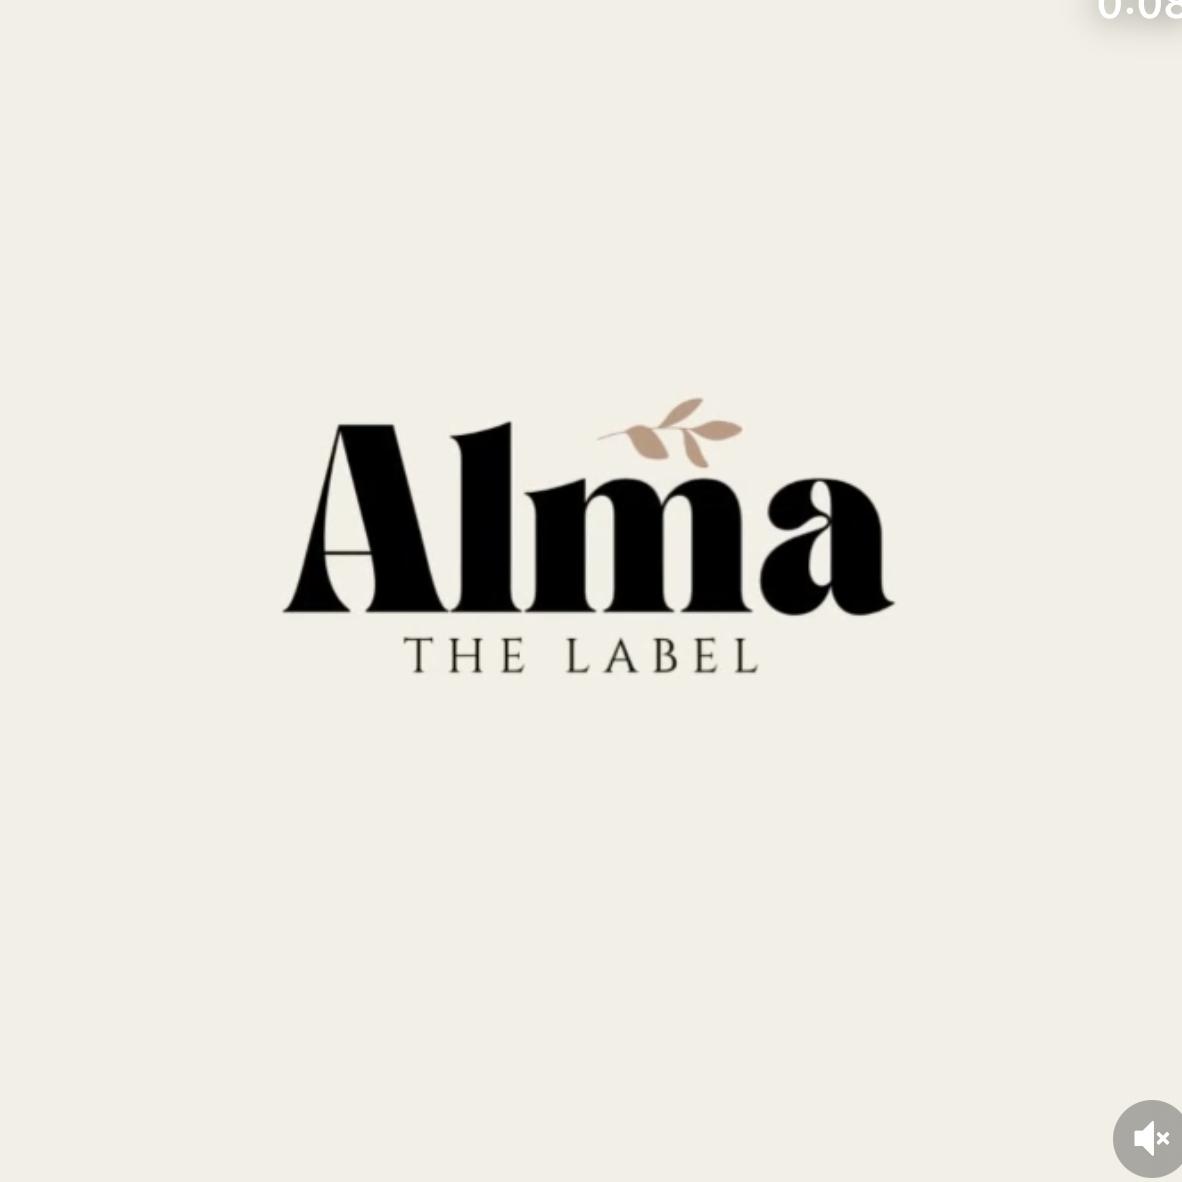 Alma The Label's images